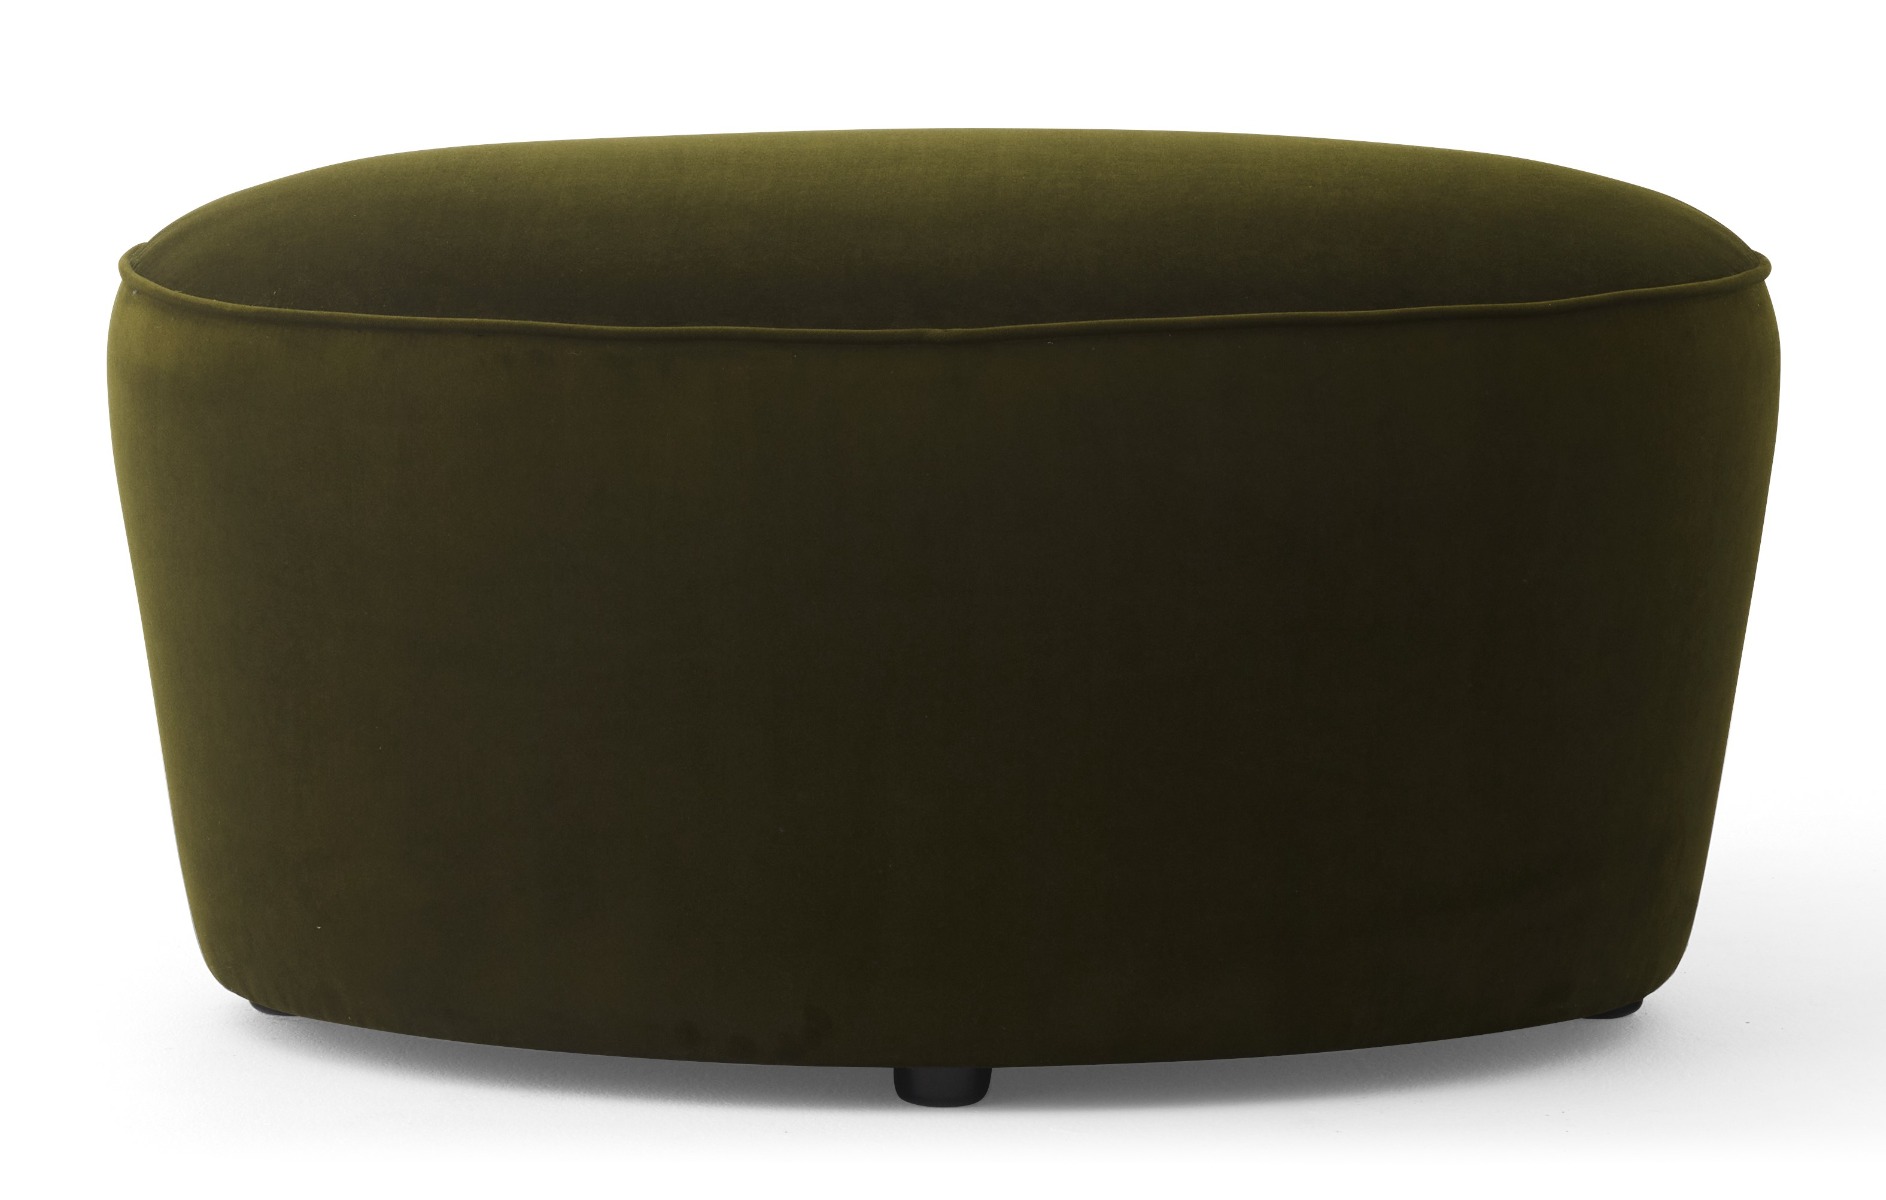 https://www.fundesign.nl/media/catalog/product/9/6/9603001-001m02zz_cairn_pouf_oval_champion_035_front.jpg